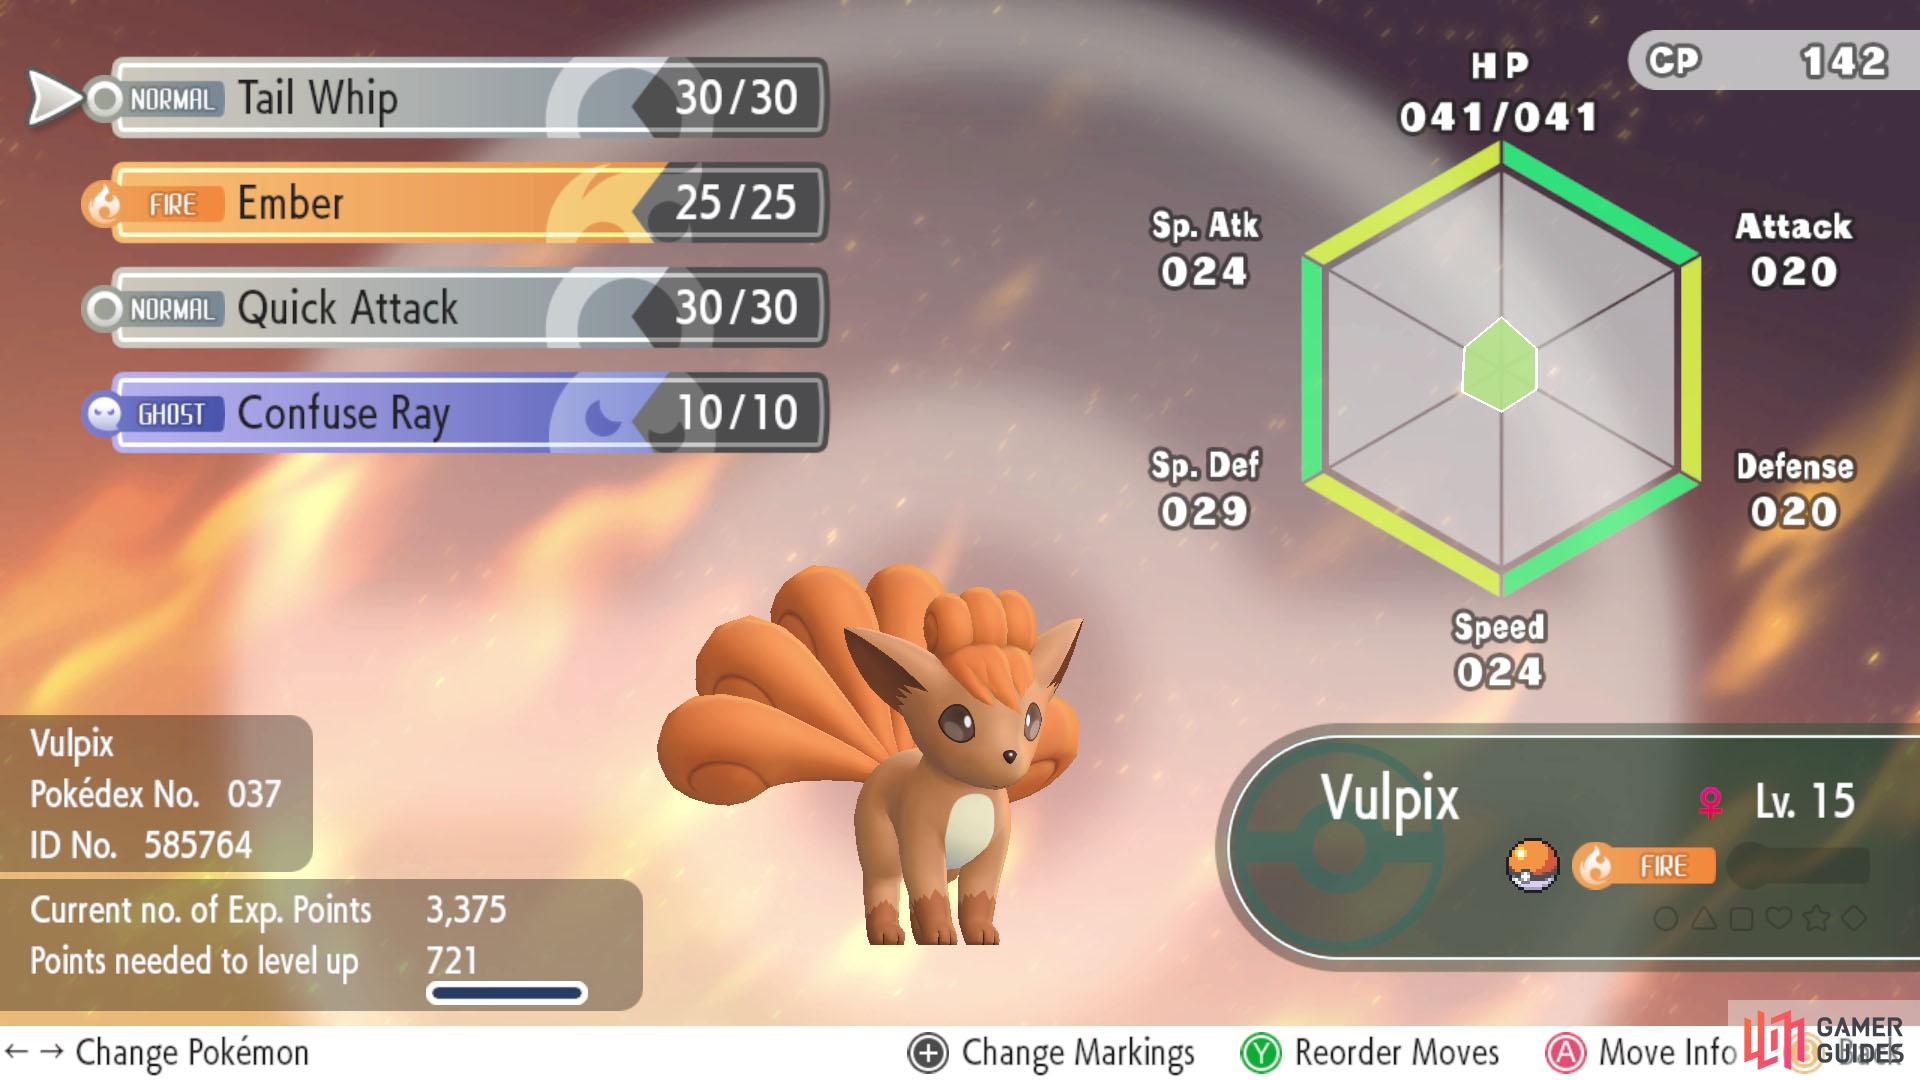 This Vulpix has higher HP and Sp. Def.